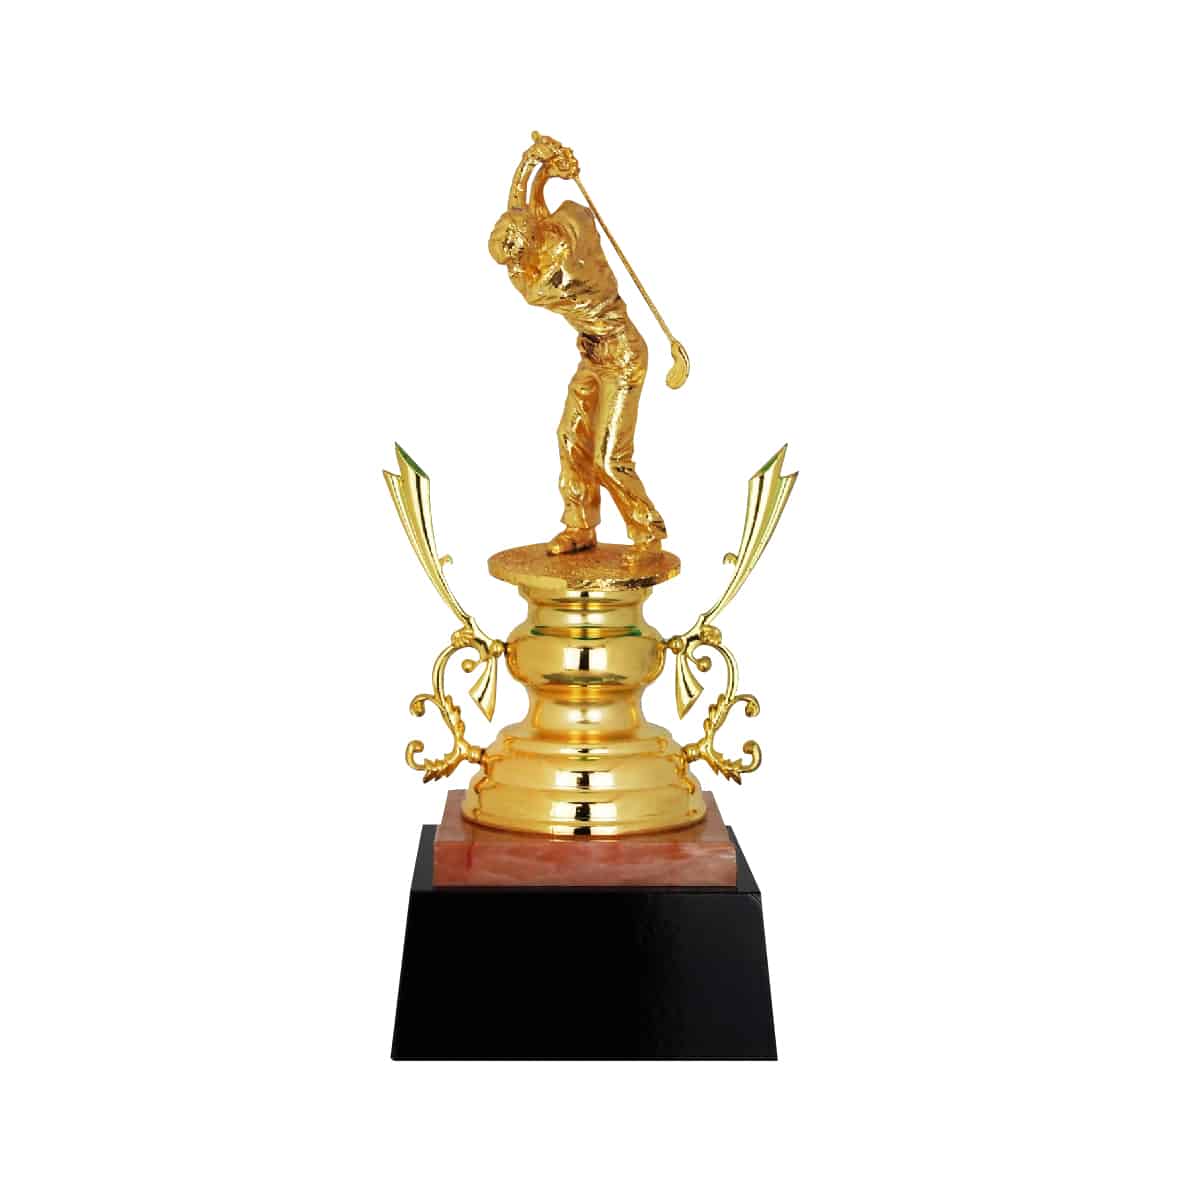 Golf Trophy at Clazz Trophy Malaysia | #1 Rated Trophy Supplier in Malaysia